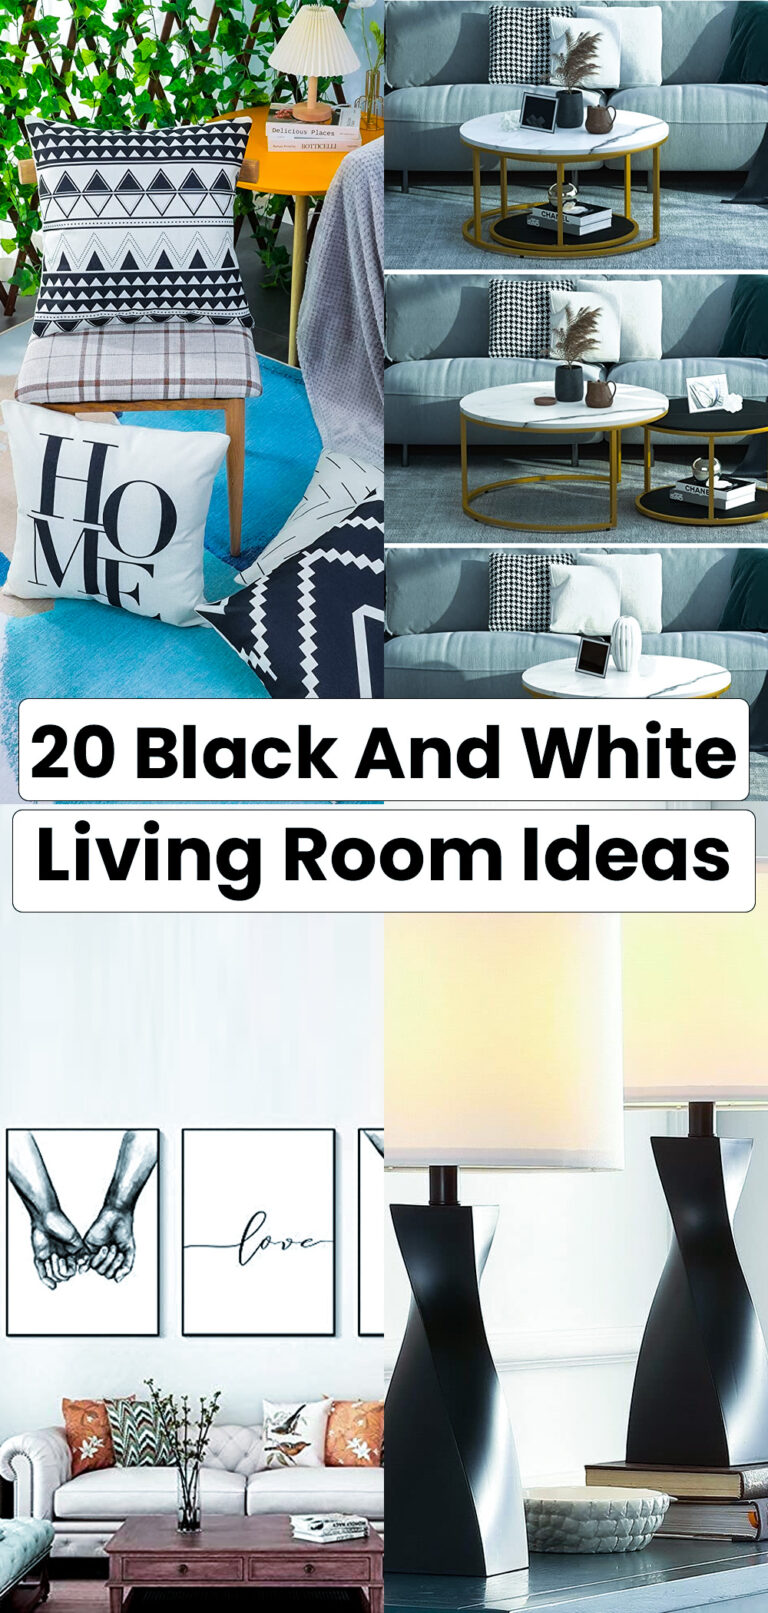 20 Black and White Living Room Ideas